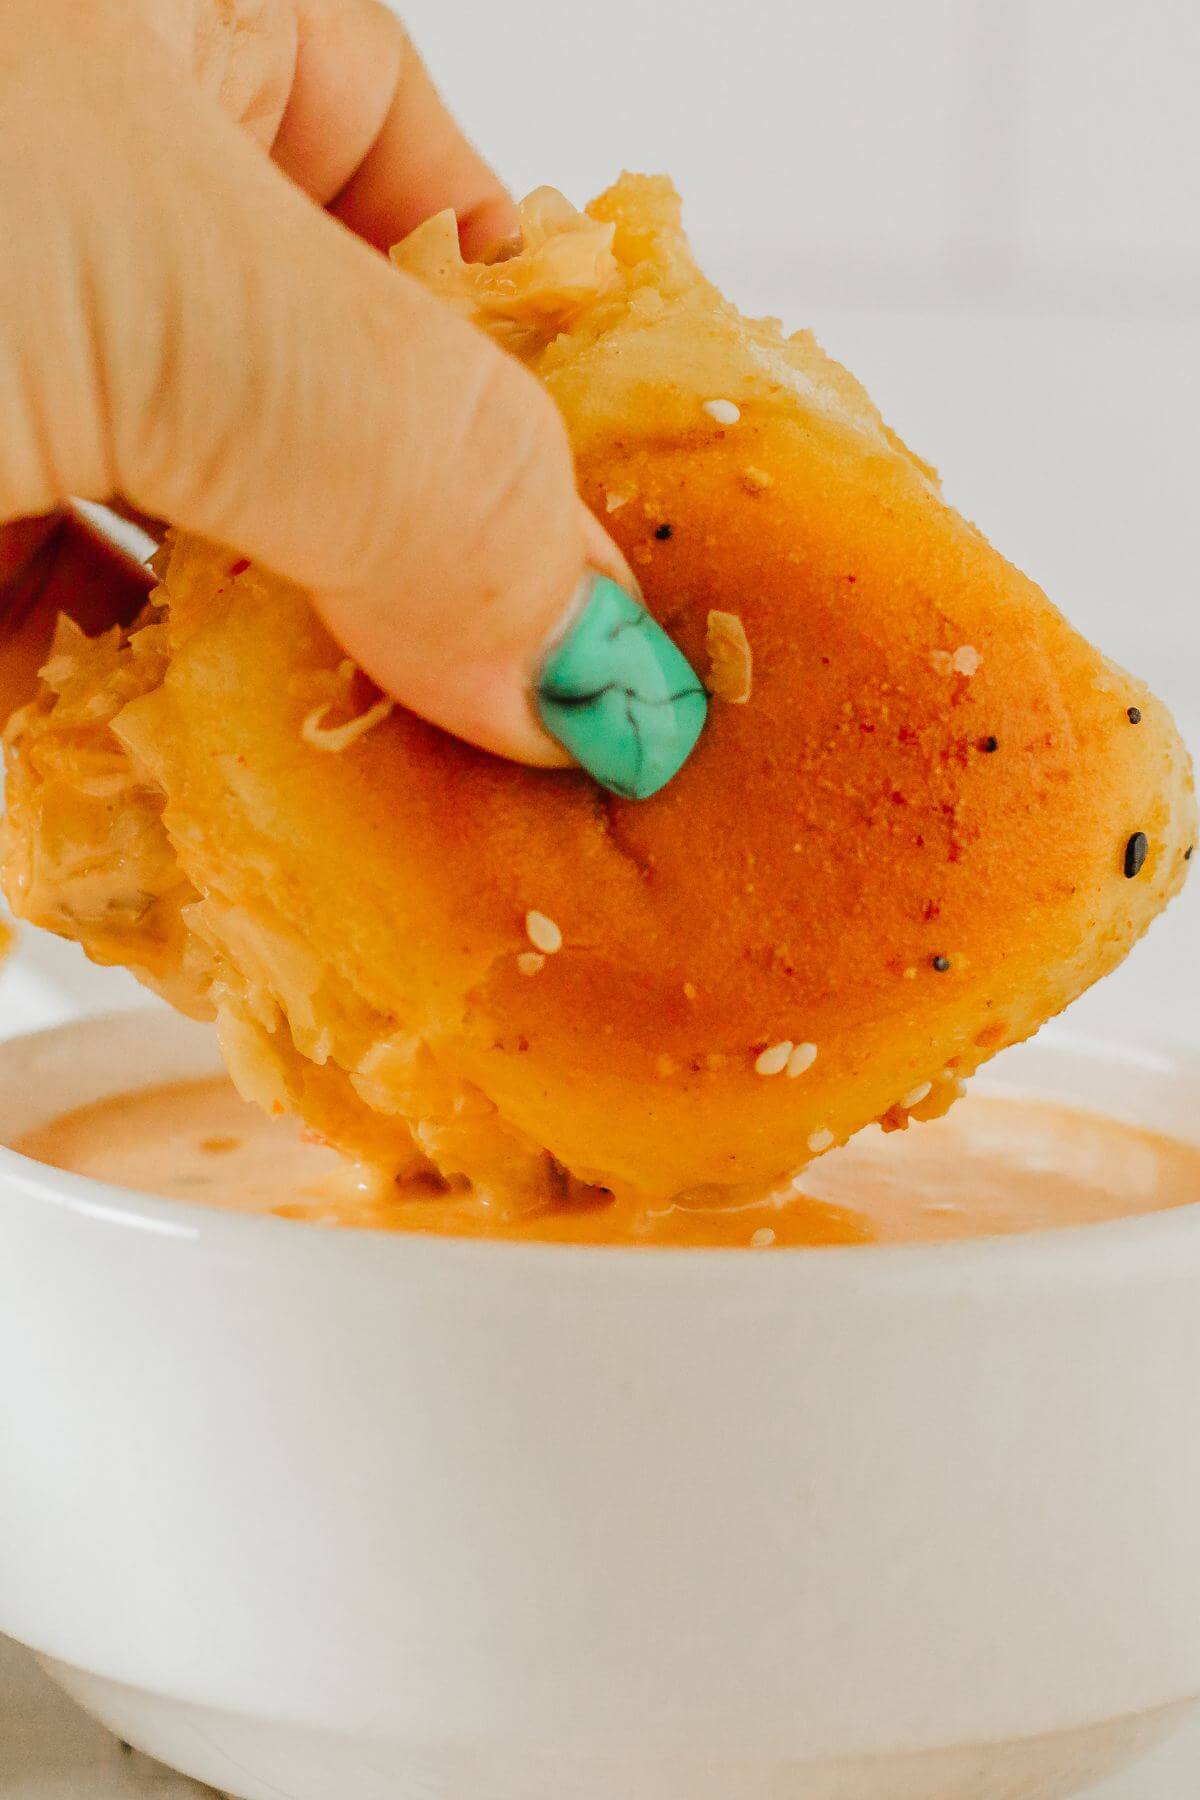 A hand dips a slider into a bowl of Thousand Island dressing.